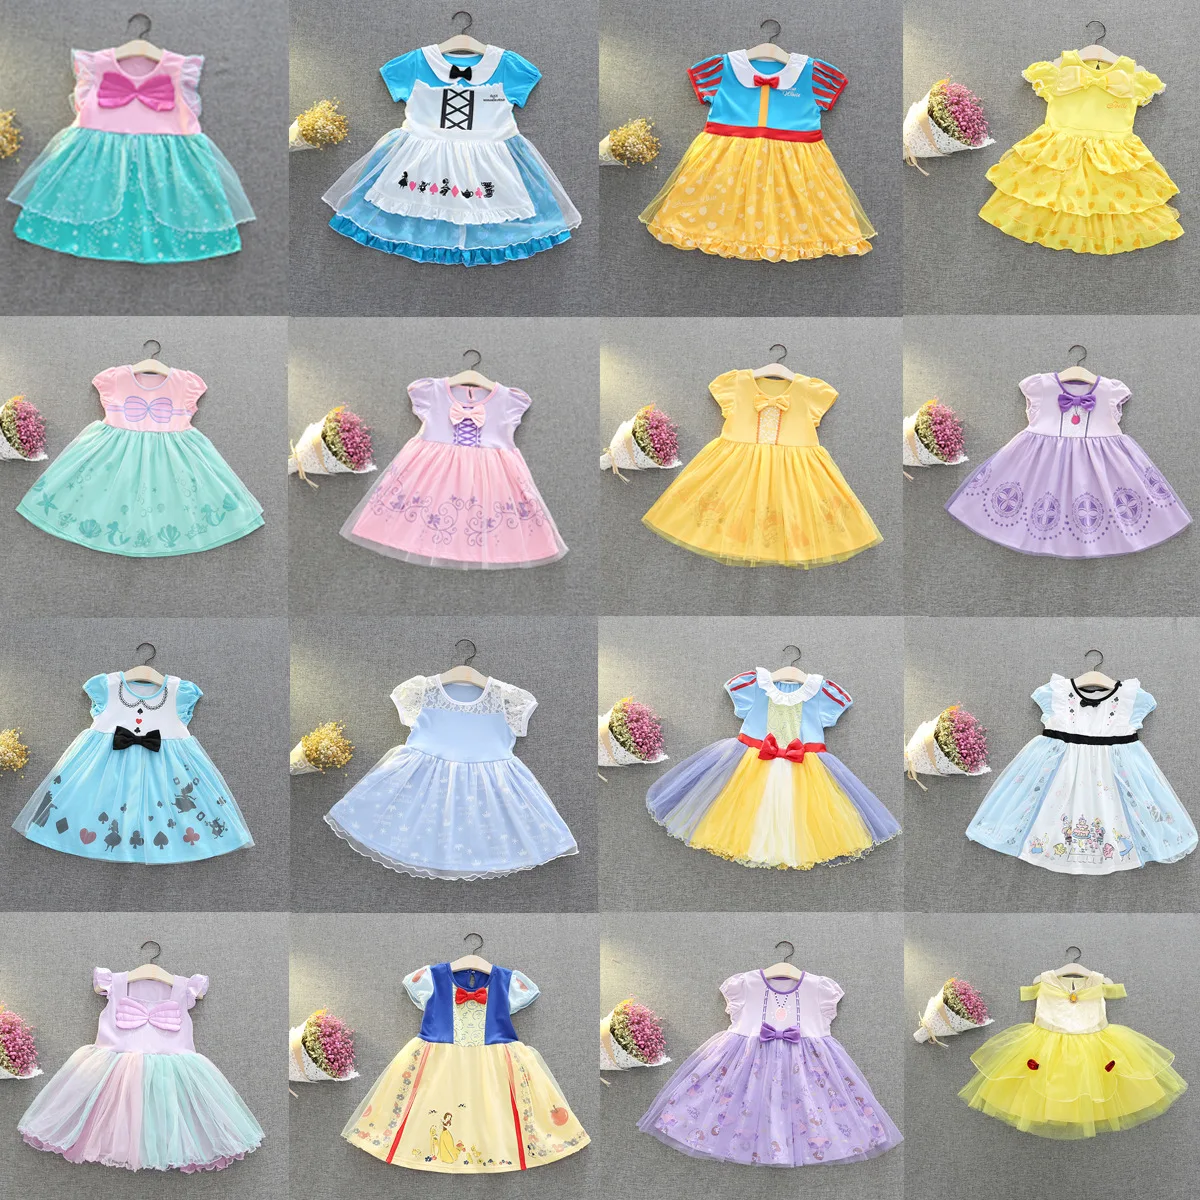 

Little Girl Cute Quality Dress Tutu Cosplay Party Dress Size 90-130 Infant Girl Clothes Princess Girl Party Colorful Dressing